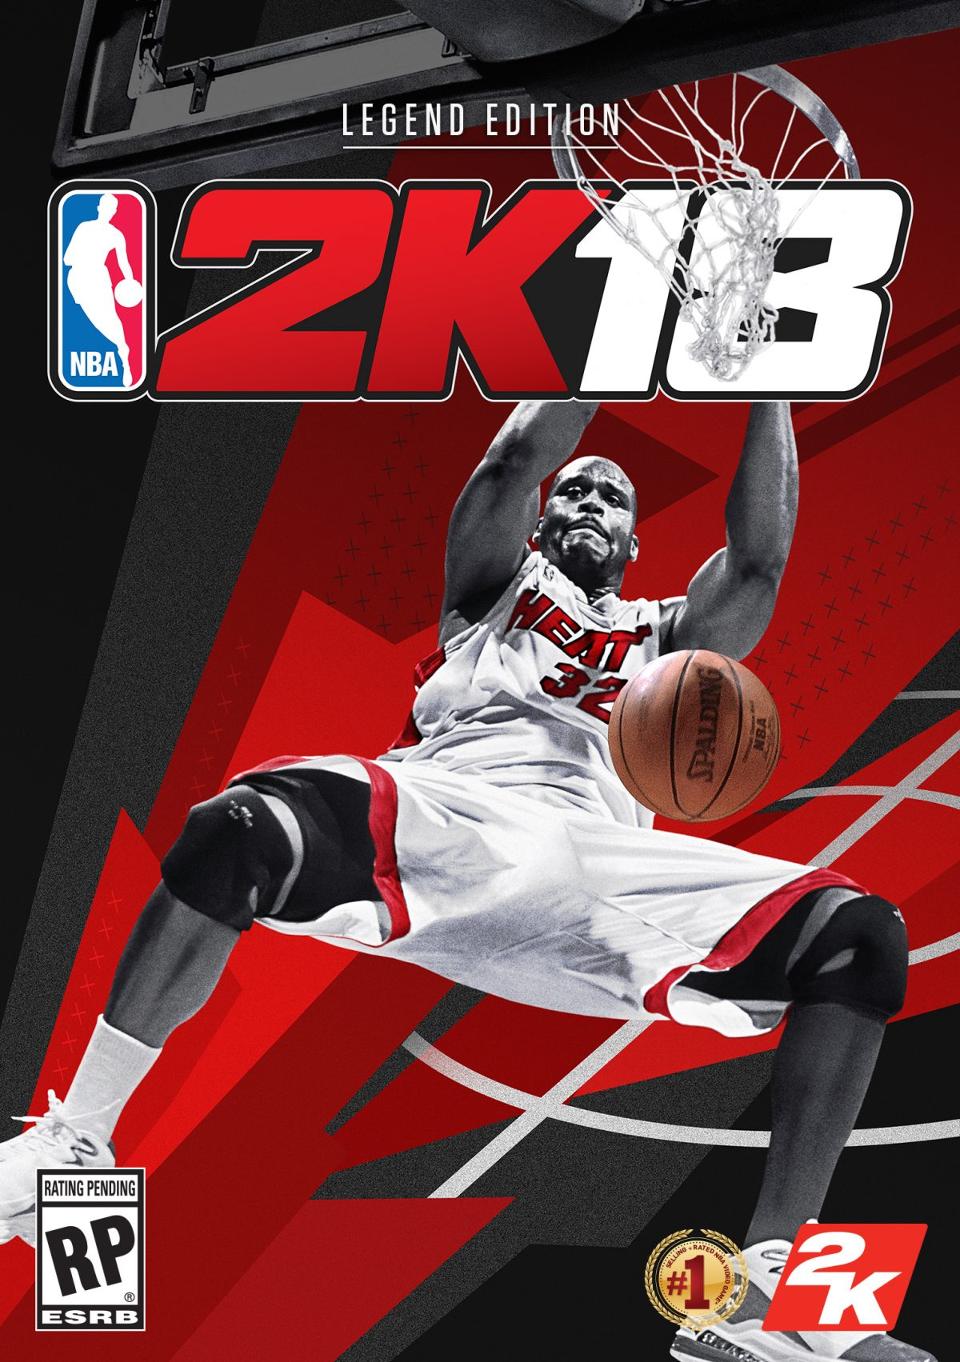 Throw NBA 2K18’s Cover In The Trash